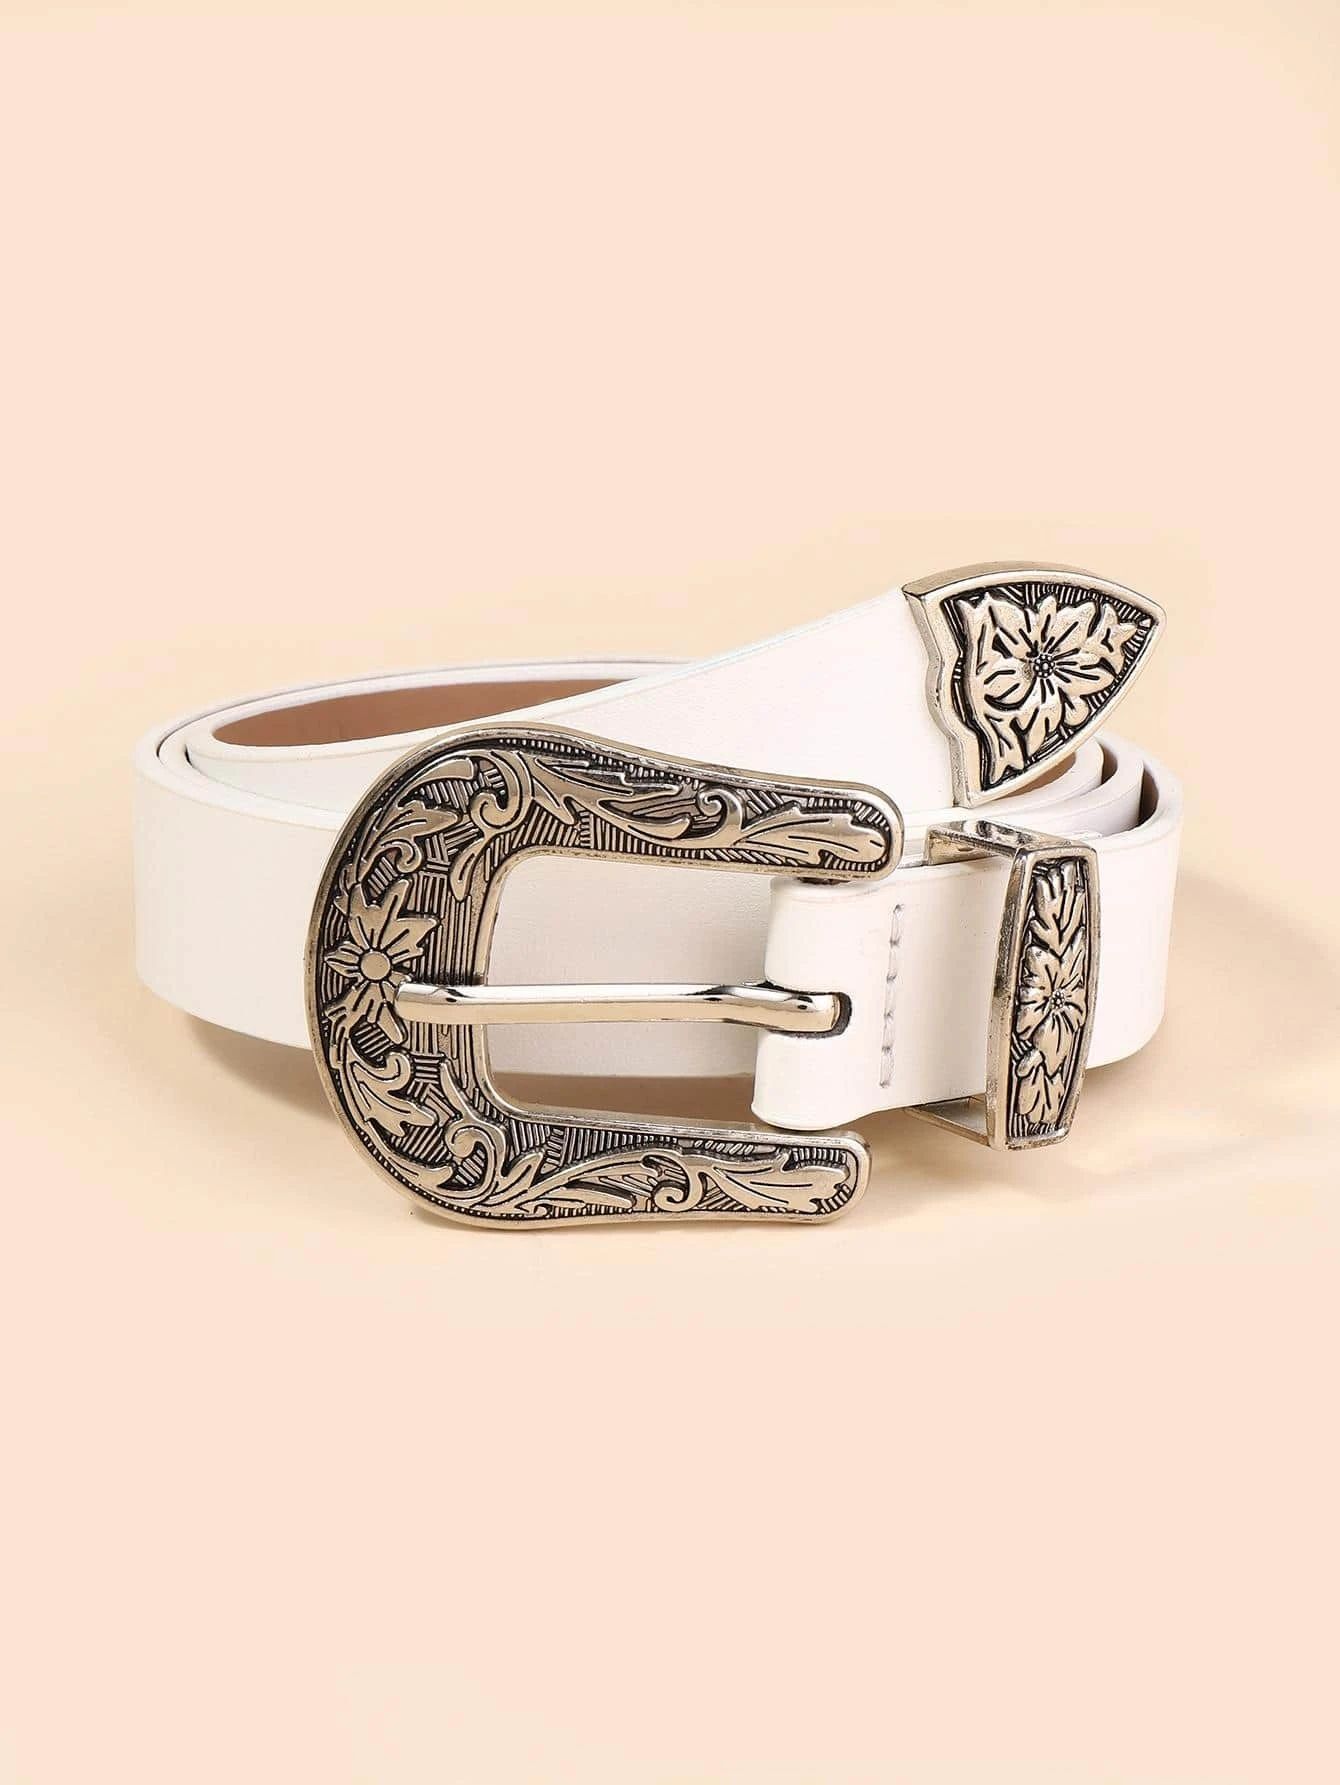 Western Style Buckle Belt For Women, Fashionable All-match Decorative Leather Belt | SHEIN